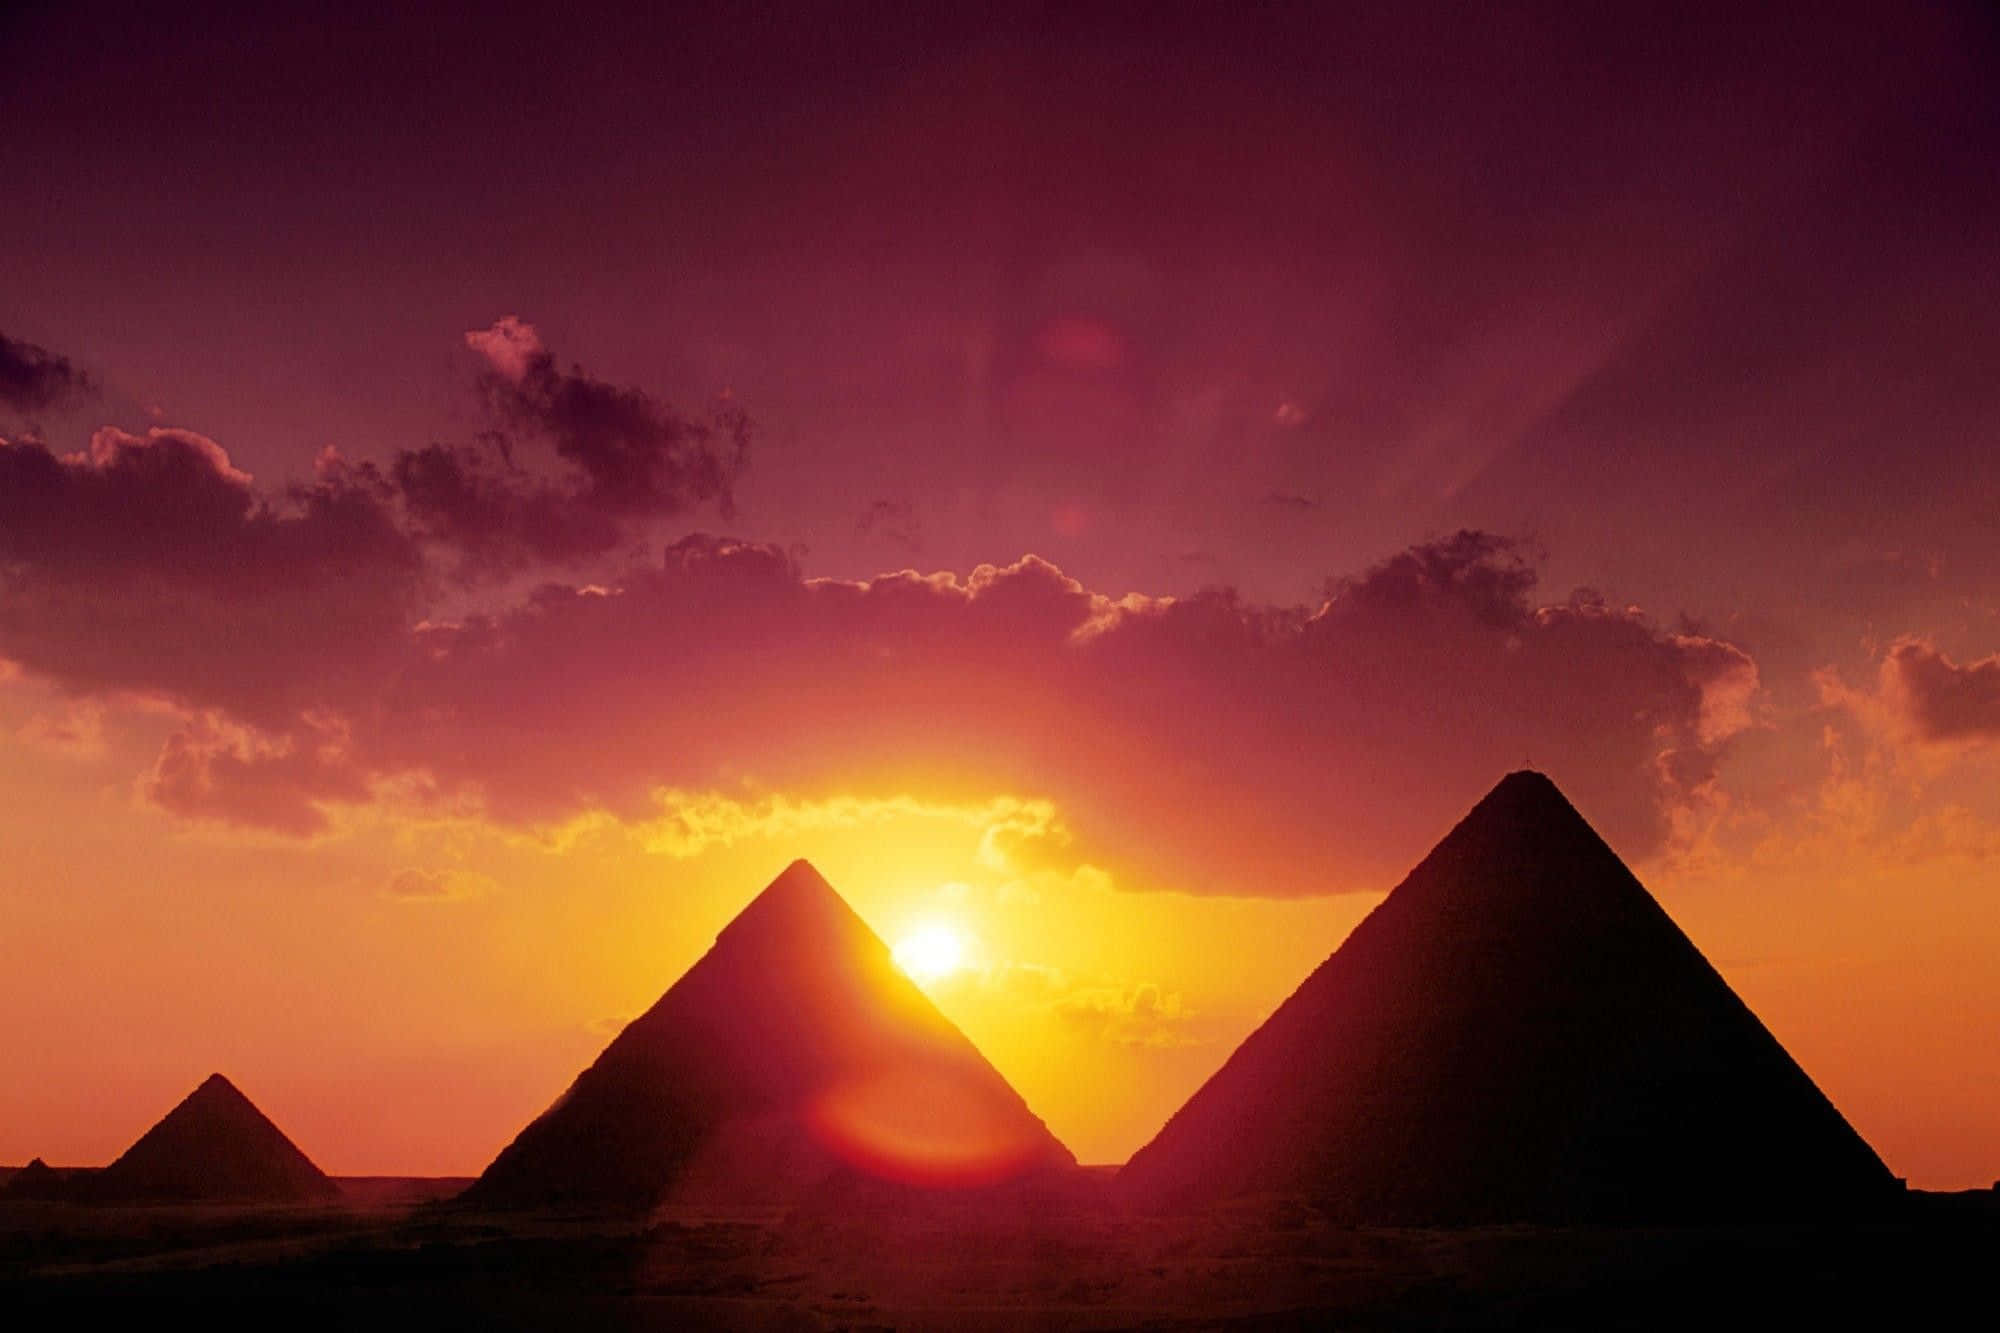 A breathtaking view of the Pyramids of Giza at sunset